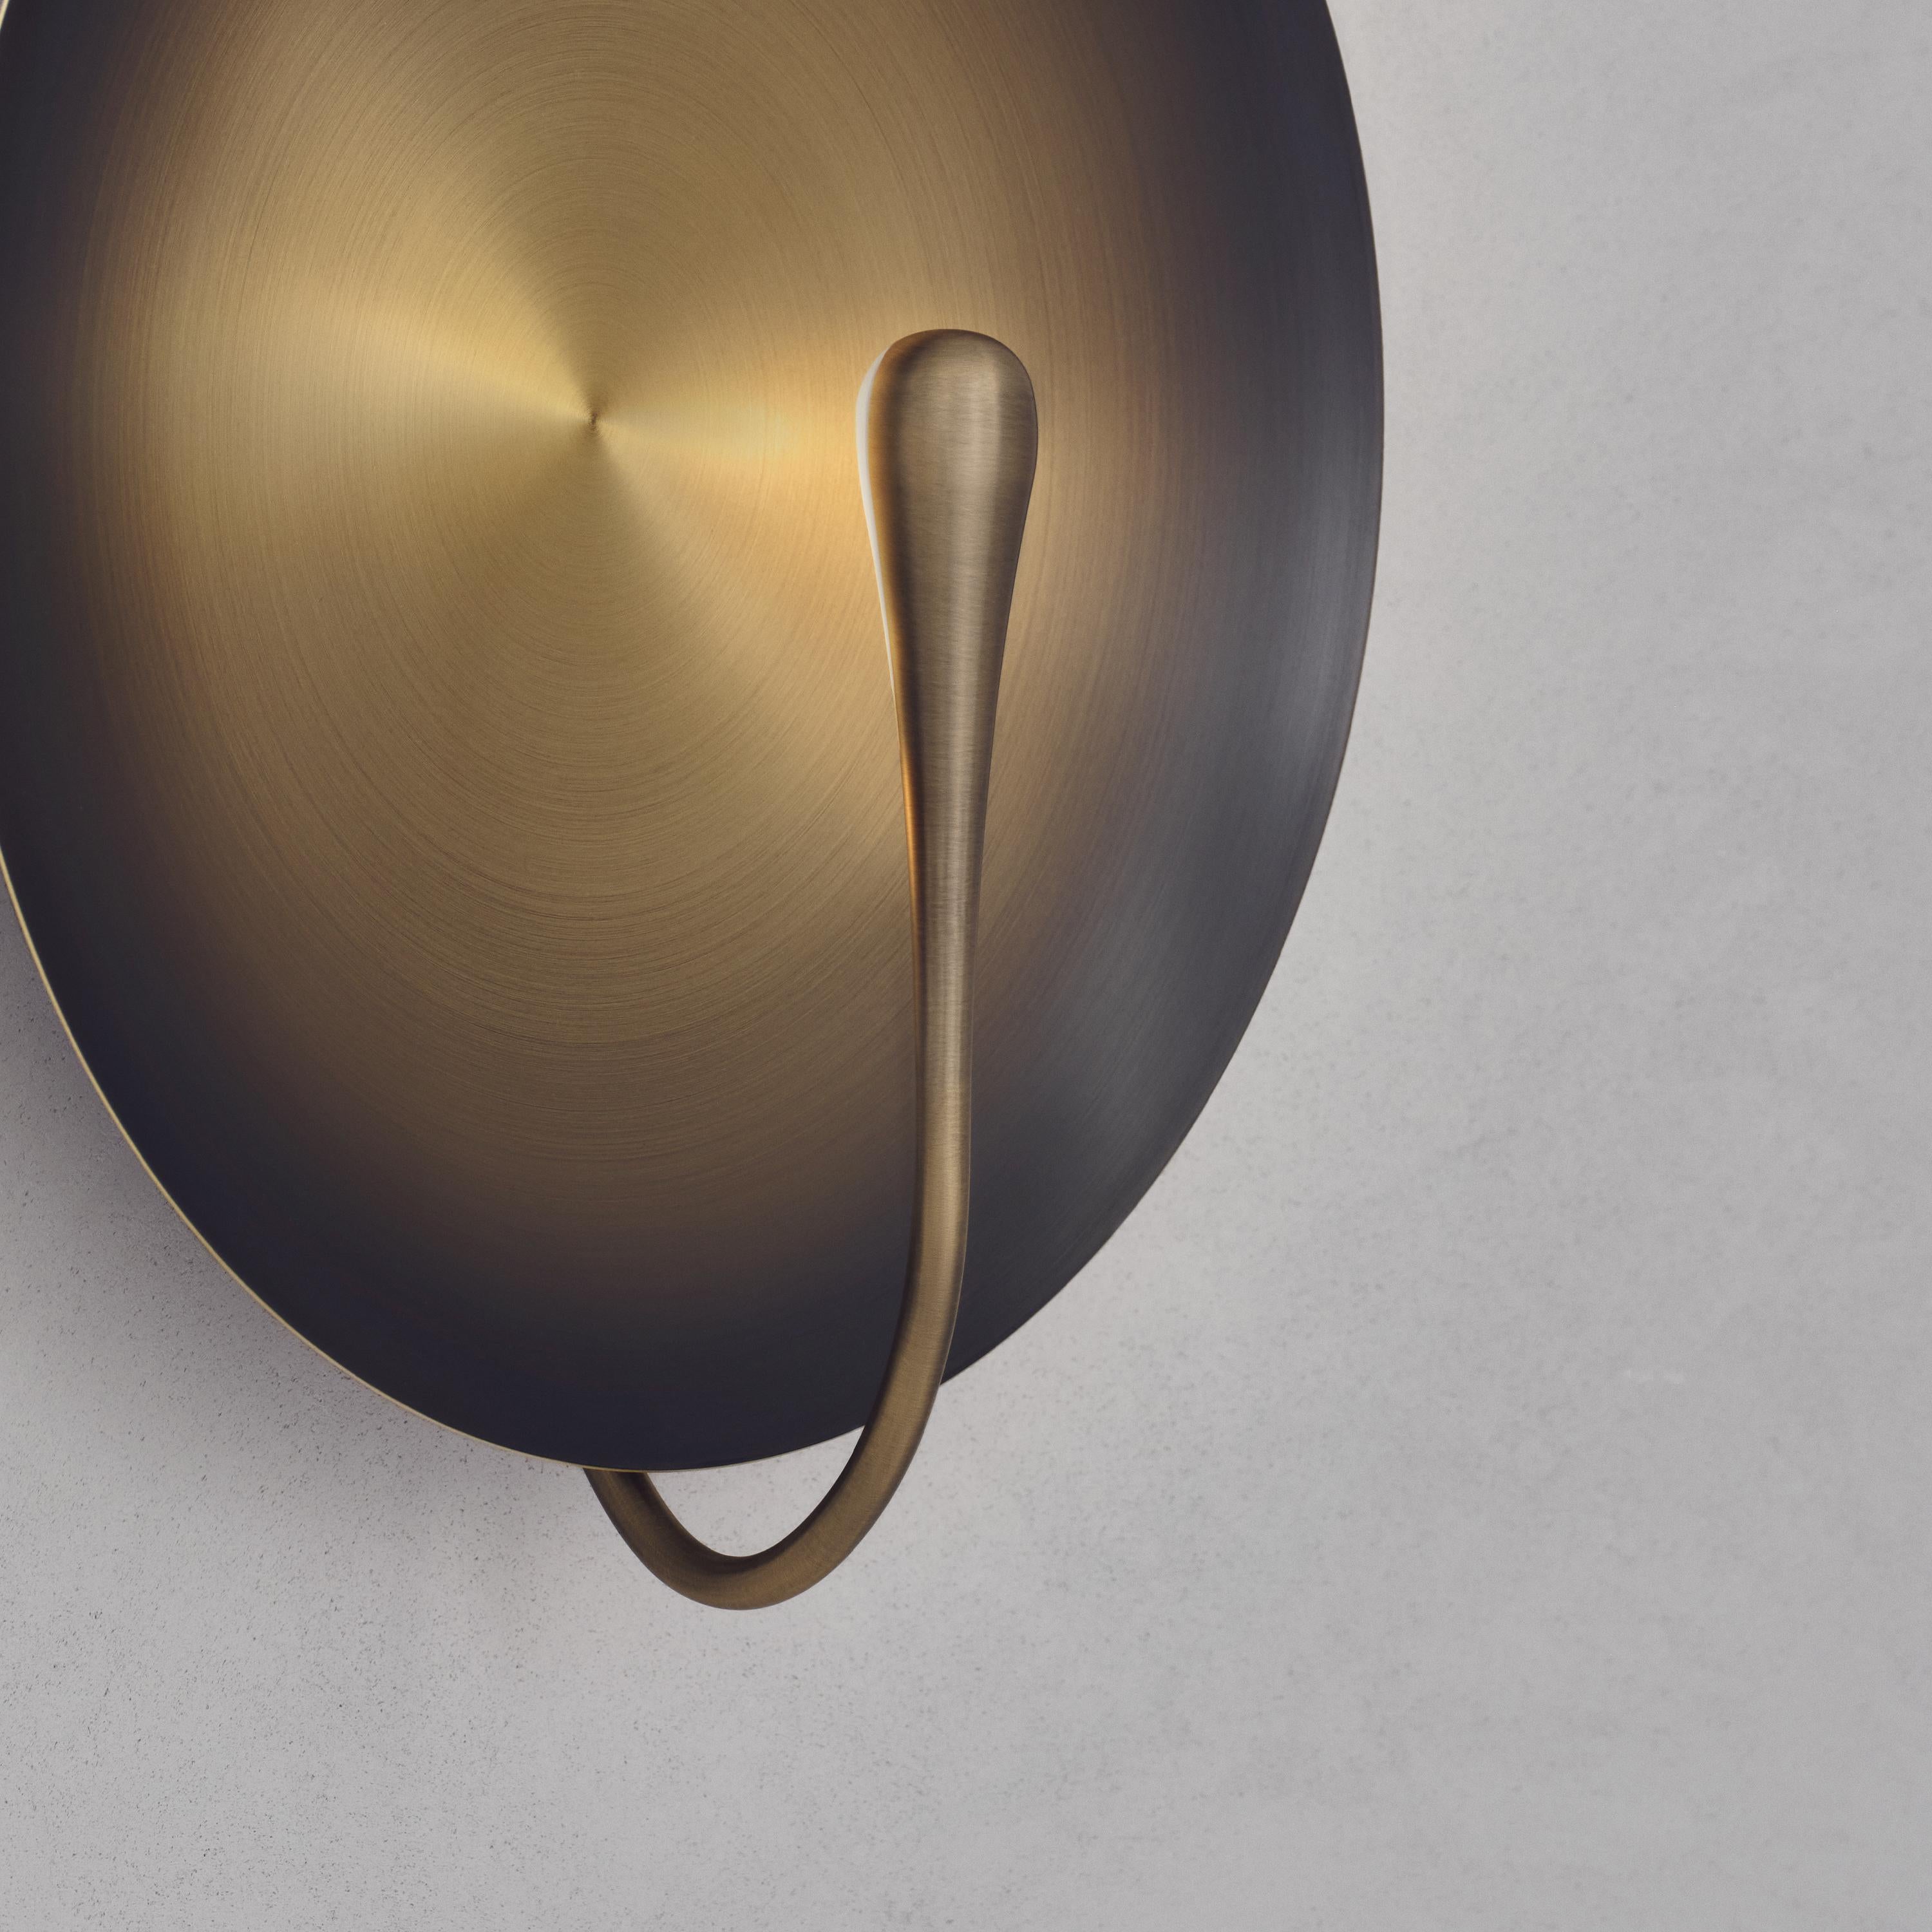 Contemporary 'Cosmic Ore' Gradient Patina Satin Brass Handmade Wall Light, Sconce For Sale